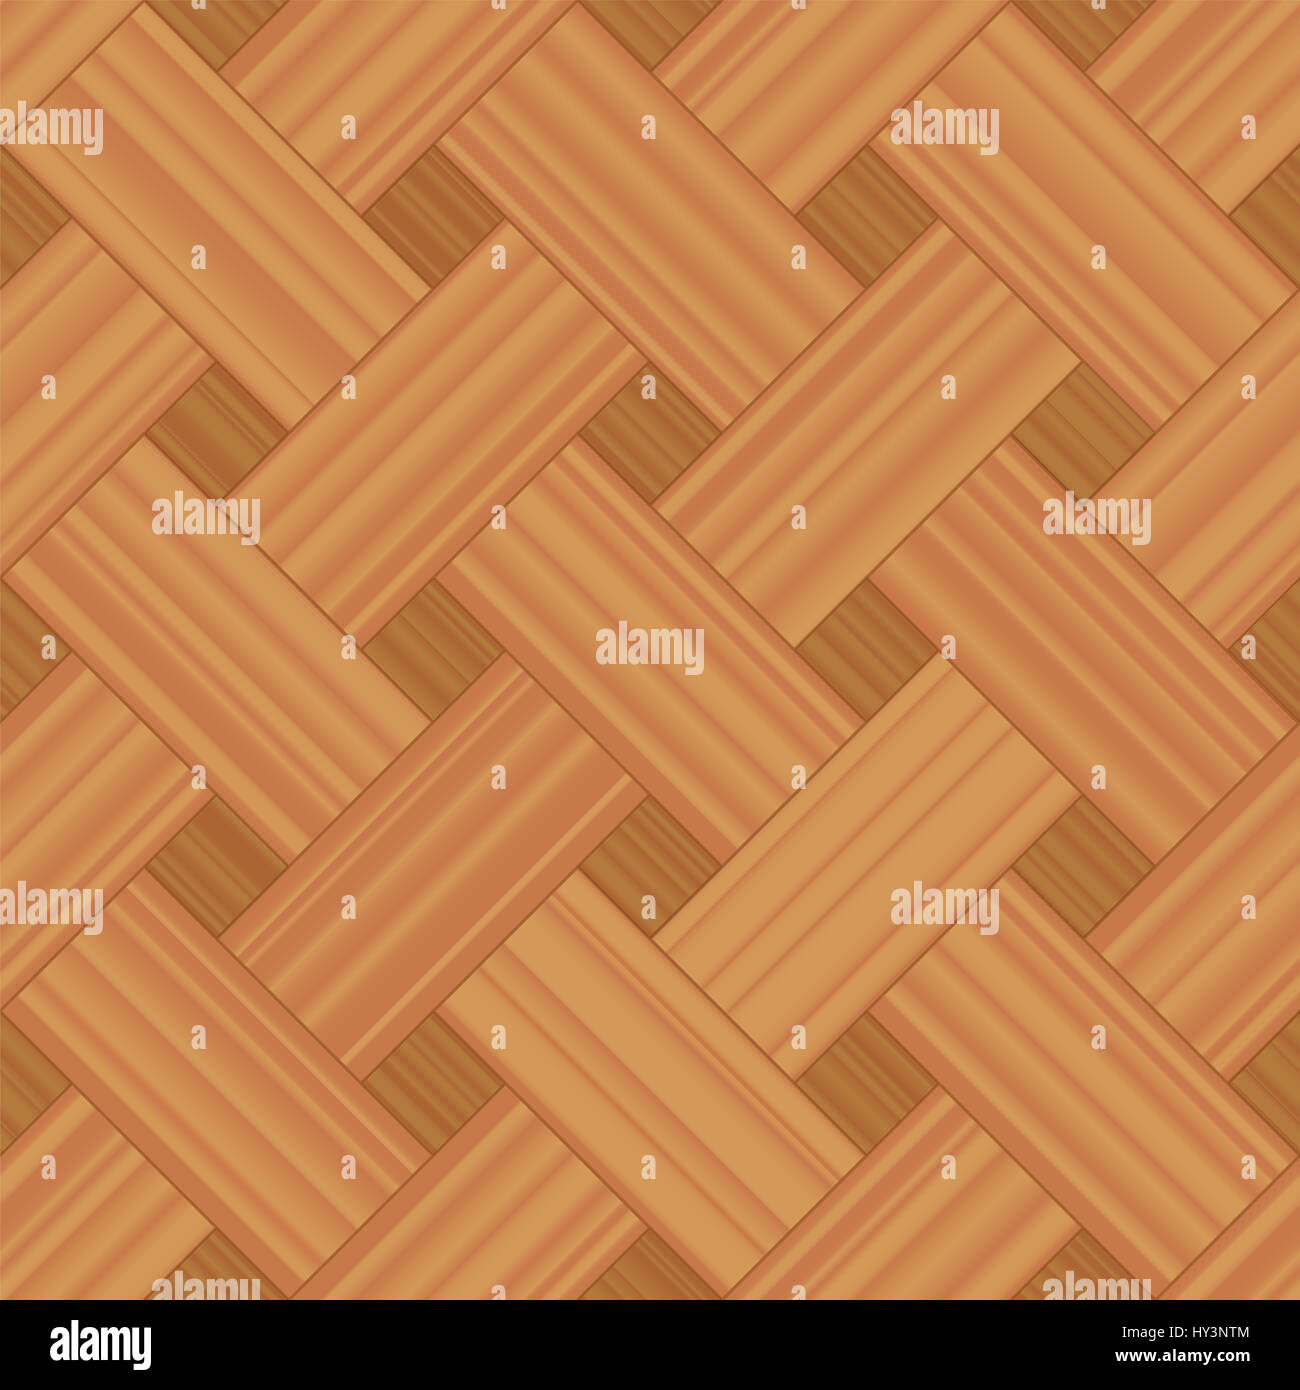 Basket weave parquet pattern - illustration of a seamless extensible wooden floor sample. Stock Photo